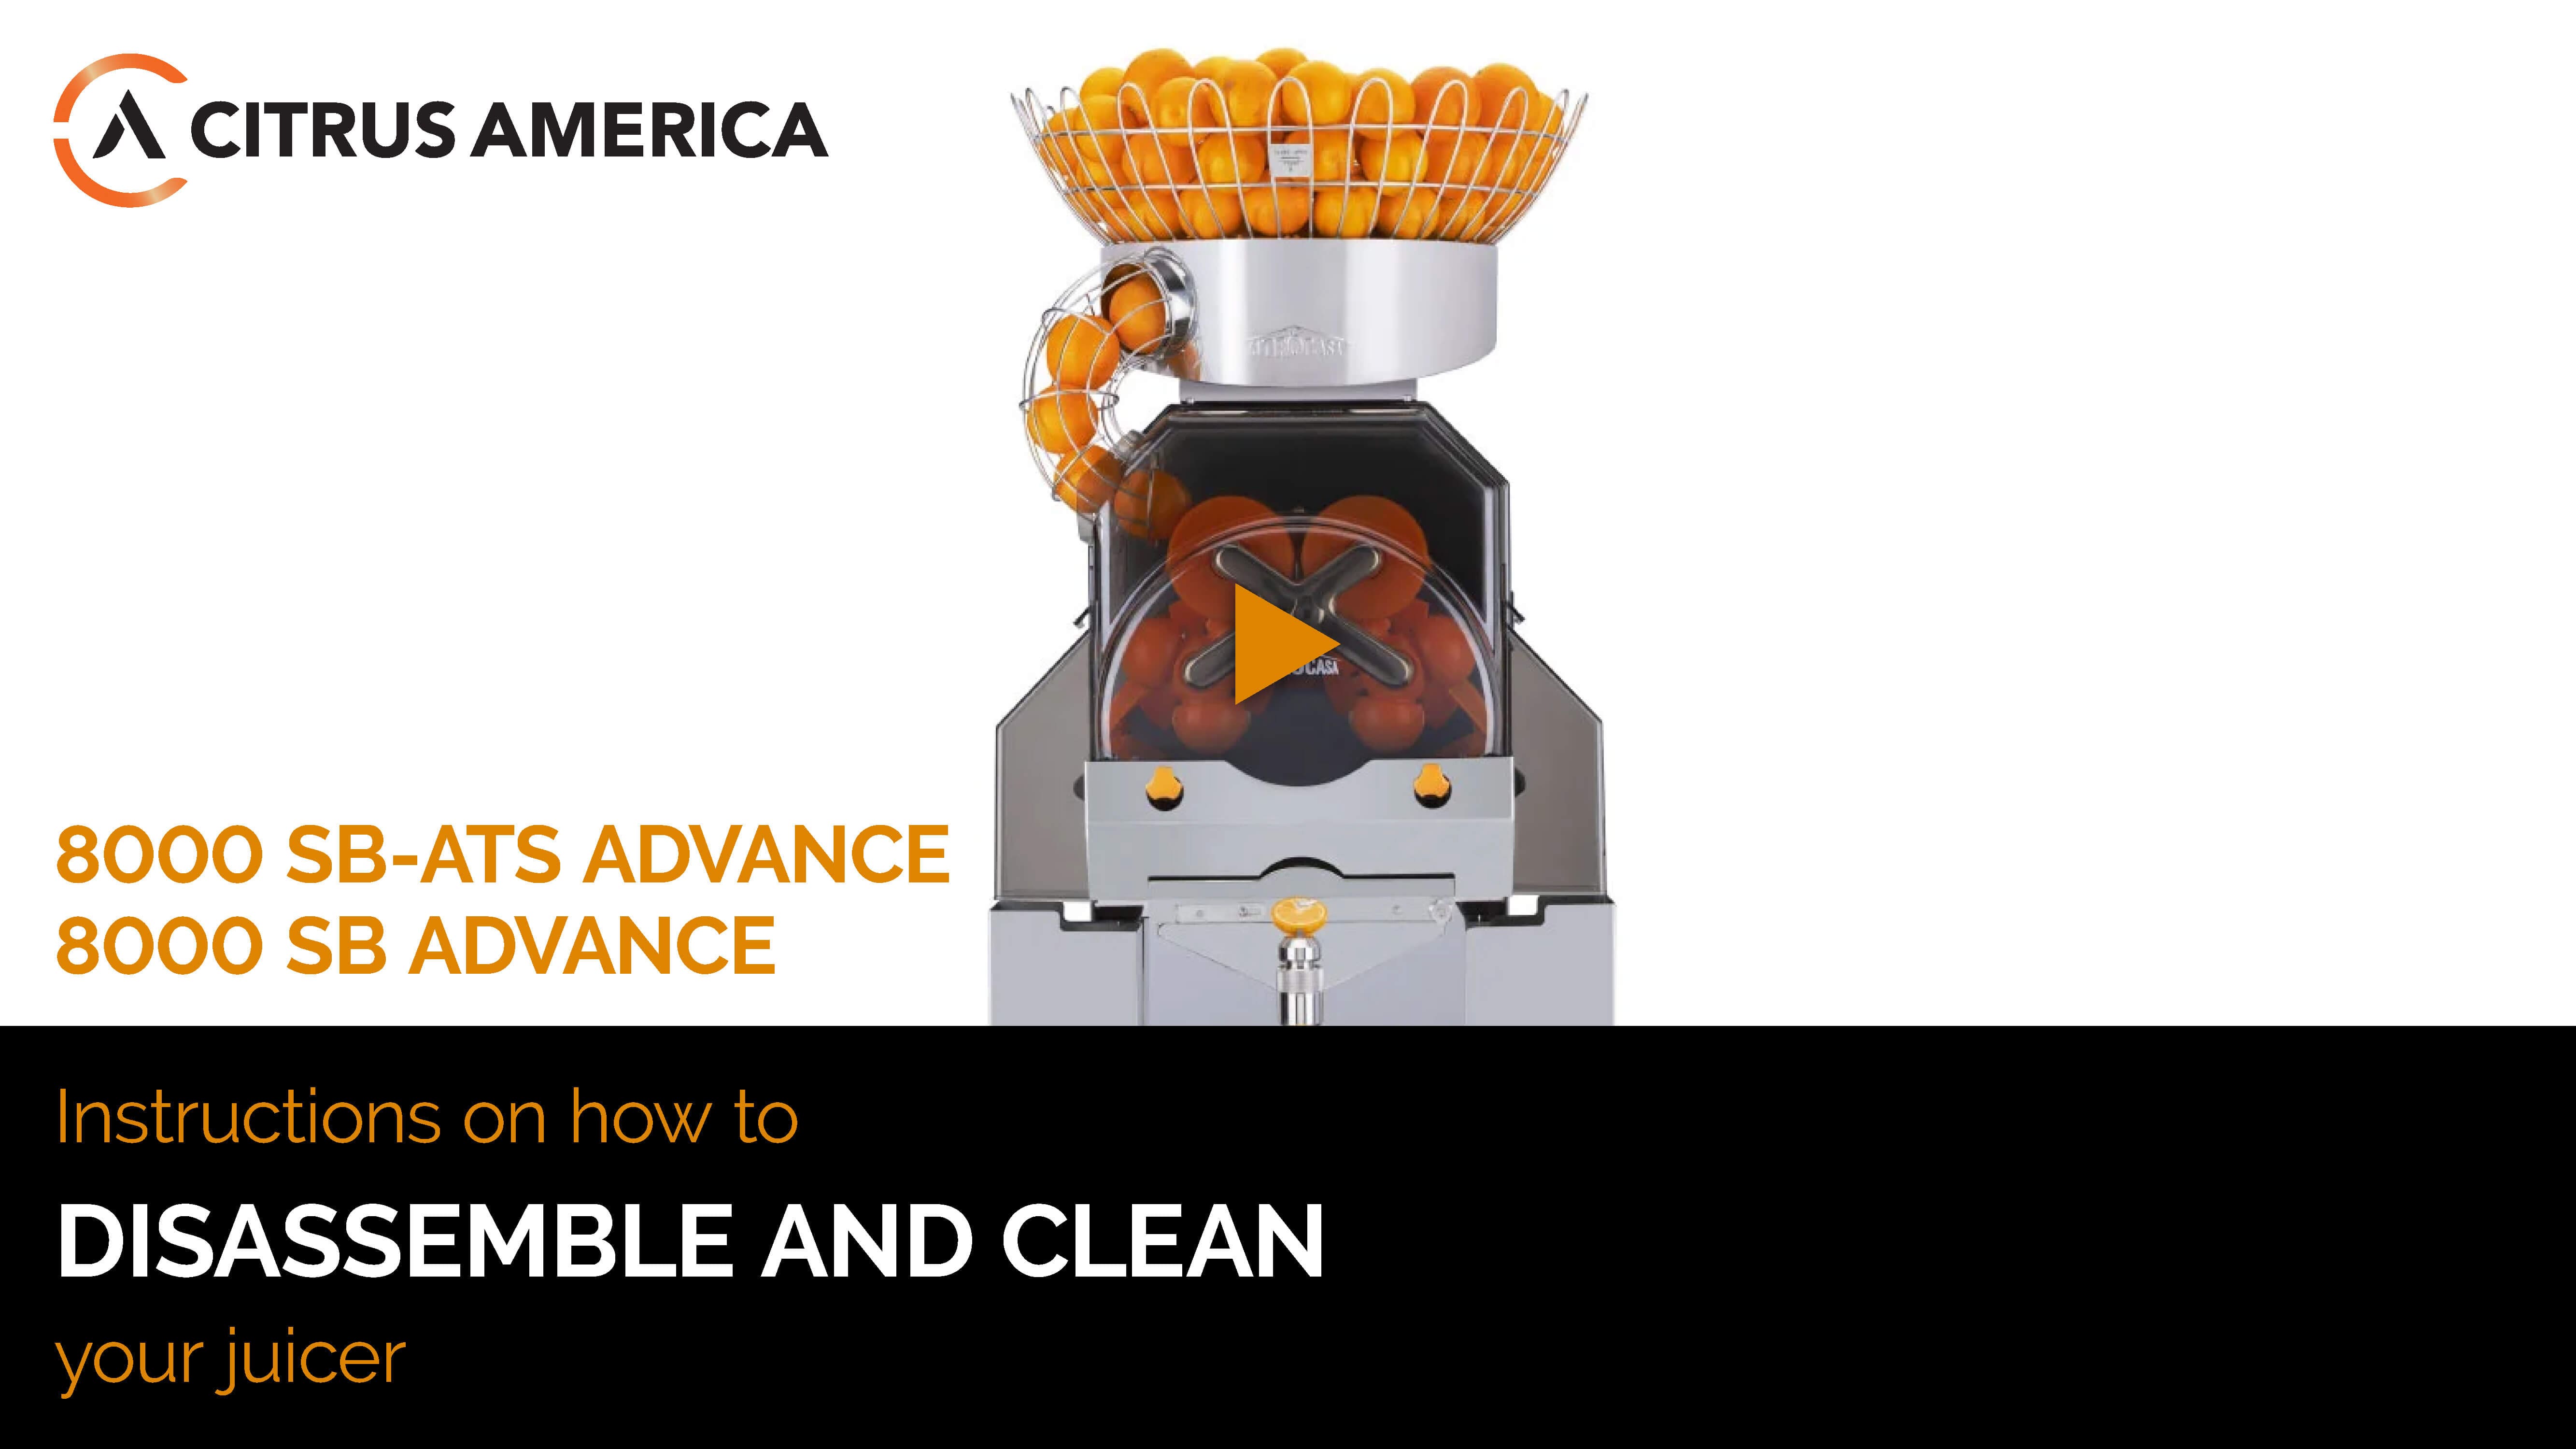 A juicing machine with whole oranges ready to be processed. Text on the image includes "CITRUS AMERICA," "8000 SB-ATS ADVANCE," "8000 SB ADVANCE," and "Instructions on how to DISASSEMBLE AND CLEAN your juicer" against a white and black background. Watch our training video for detailed guidance.